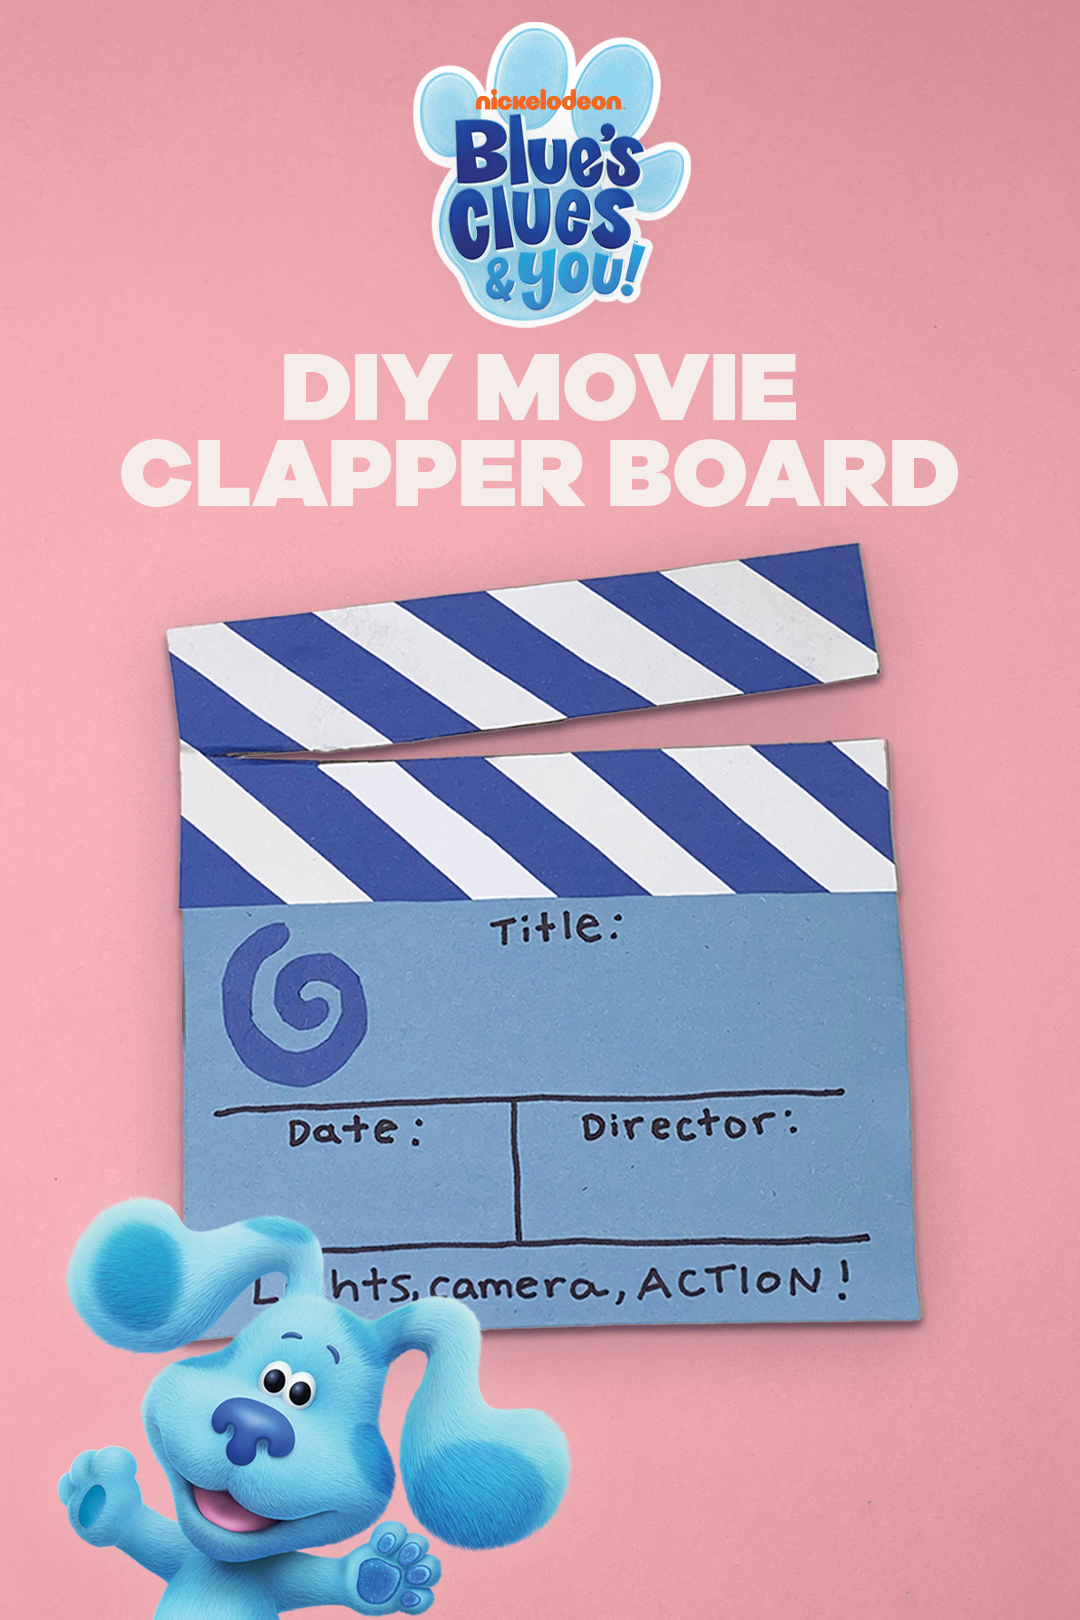 Tookit DIY: How to Build a Tag Board for a Slate/Clapperboard